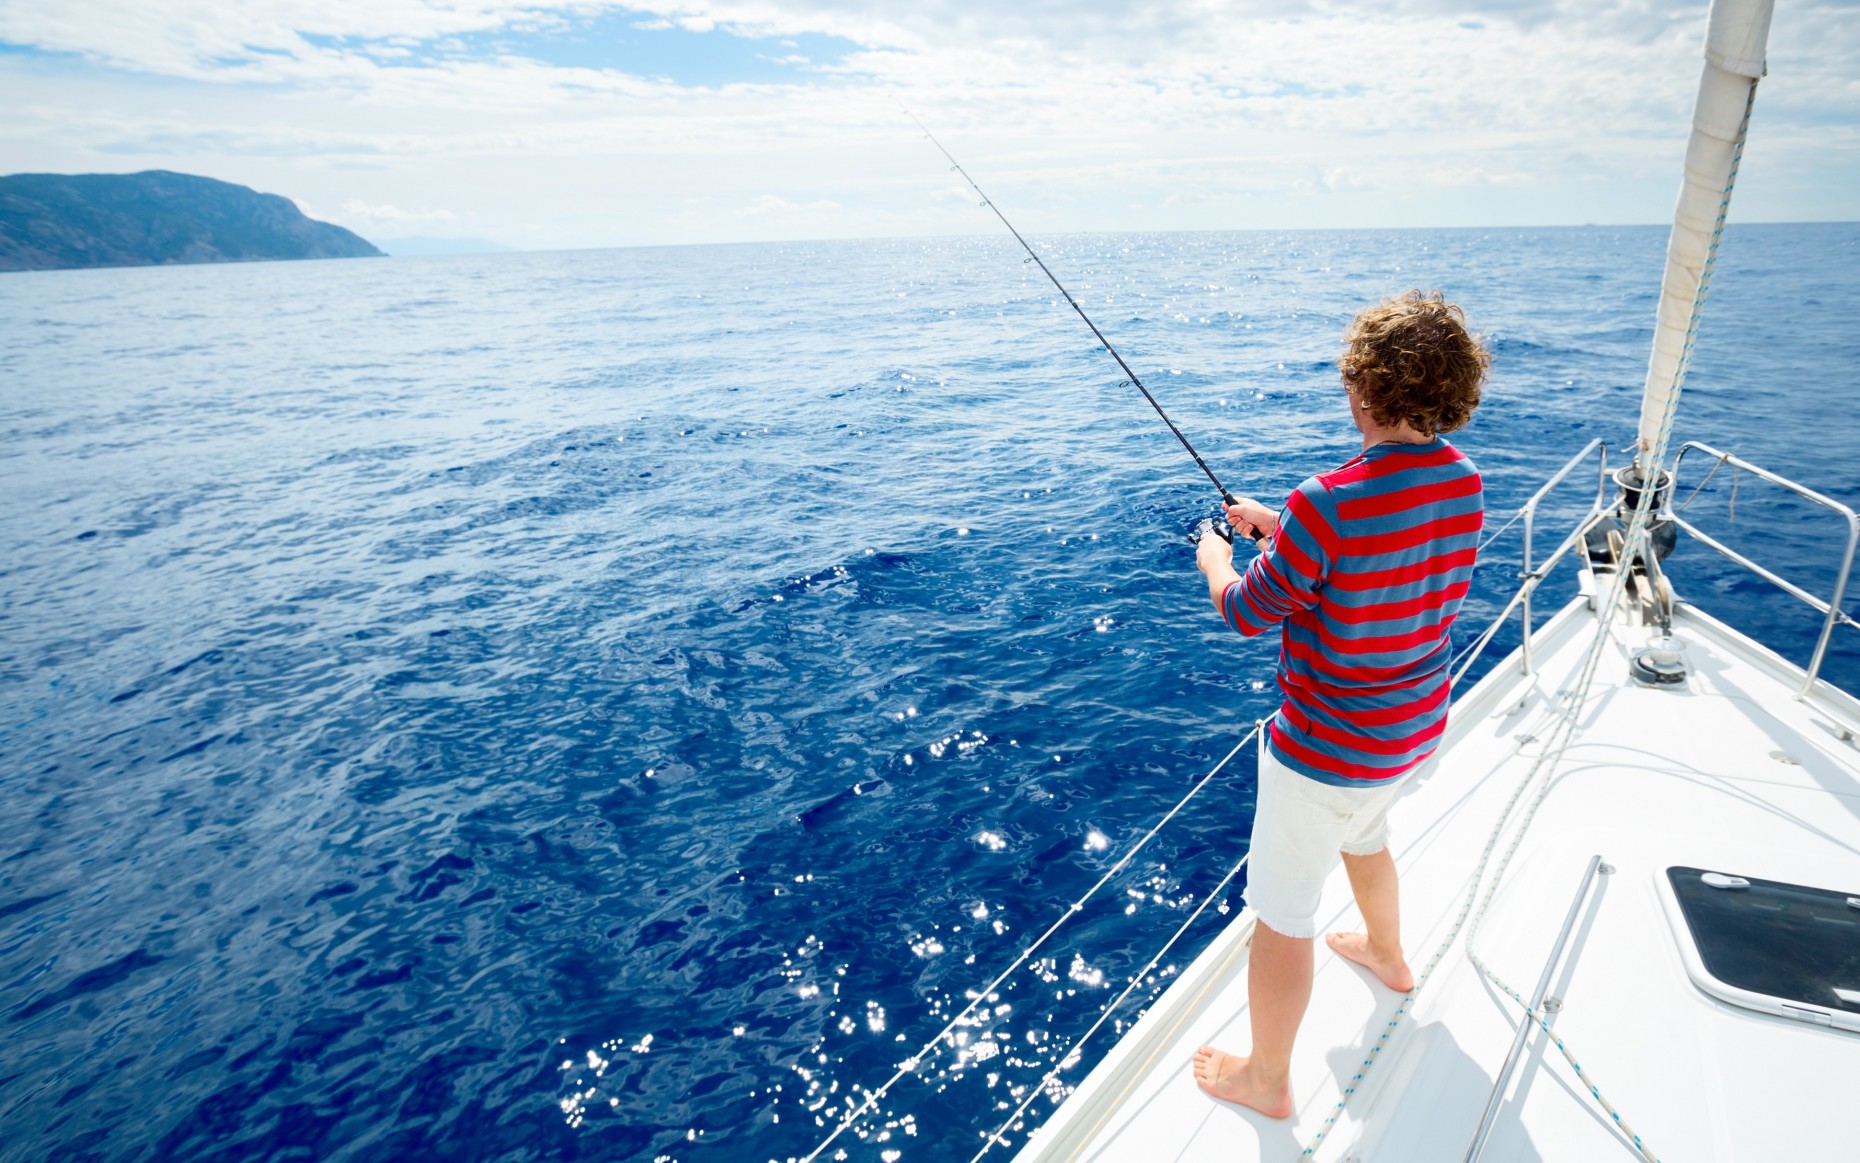 Hooked Horizons: Half-Day Fishing Trip: Book Tours & Activities at